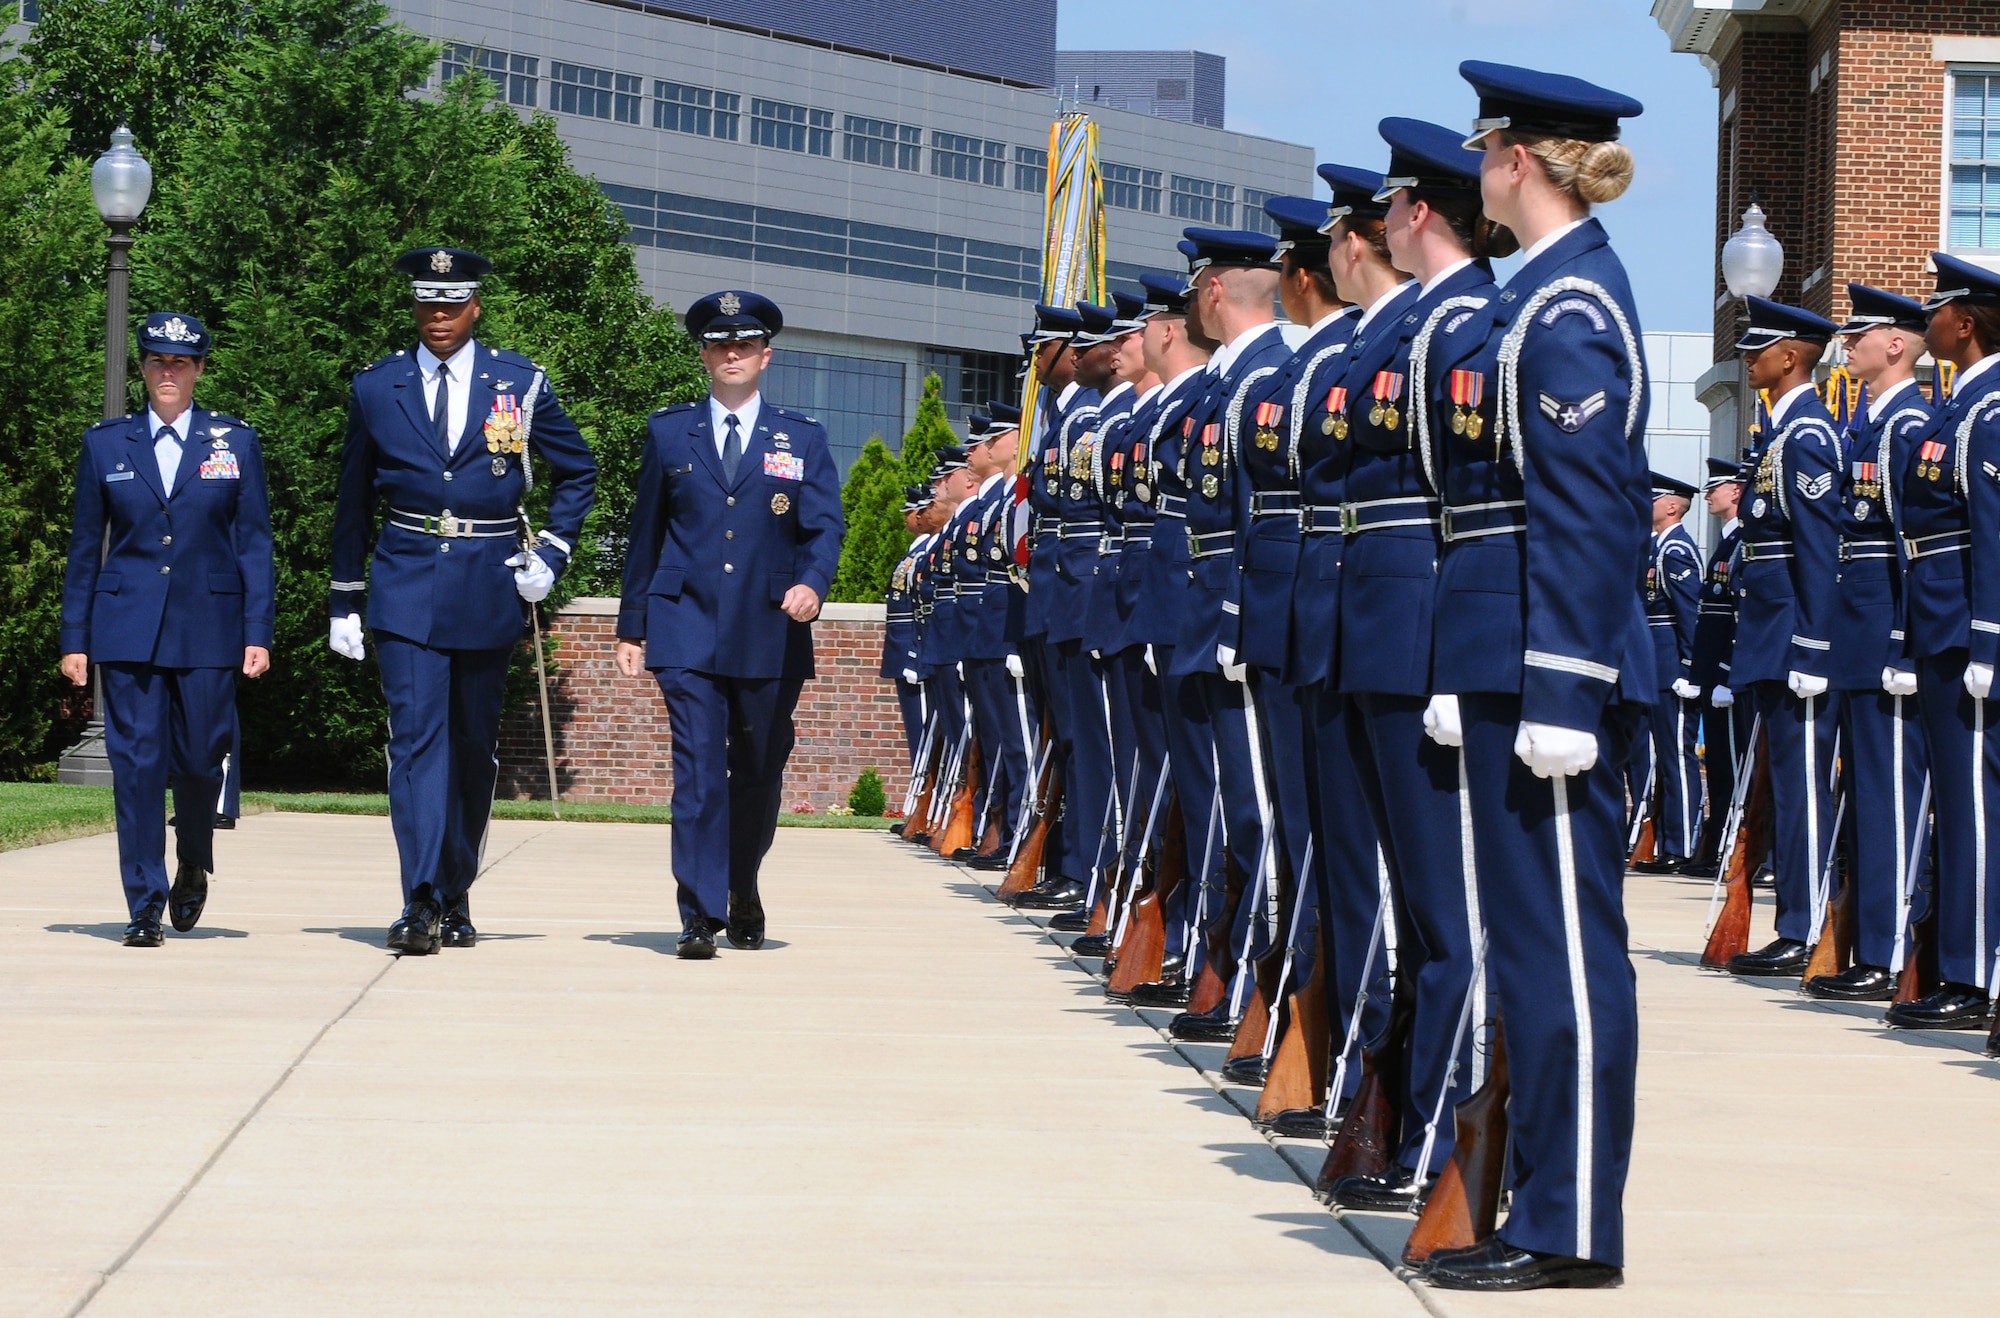 Maj. Tyson Willis, U.S. Air Force Honor Guard director of operations, leads Col. Elizabeth Borelli, 11th Operation Group commander, and Lt.  Col. Raymond M. Powell, U.S. Air Force Honor Guard commander, during an inspection of the troops as part of the Air Force Honor Guard change-of-command ceremony June 23 on the U.S. Air Force Ceremonial Lawn, Bolling Air Force Base, D.C. These ceremonies represent the formal passing of responsibility, authority and accountability of command from one officer to another. (U.S. Air Force photo by Senior Airman Alex Montes)